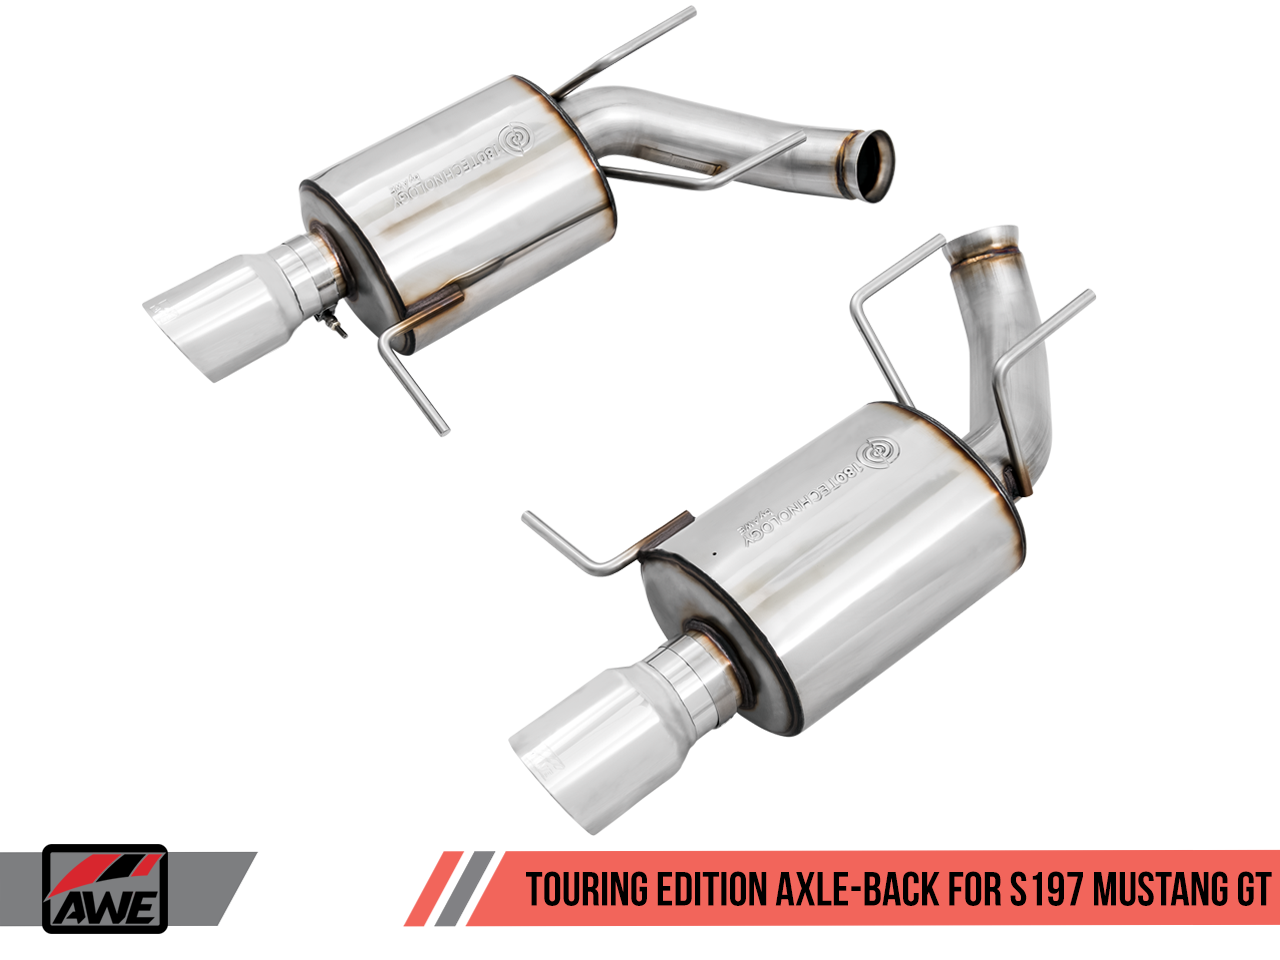 AWE Tuning Touring Edition Axle-back Exhaust for the S197 Ford Mustang GT - Chrome Silver Tips